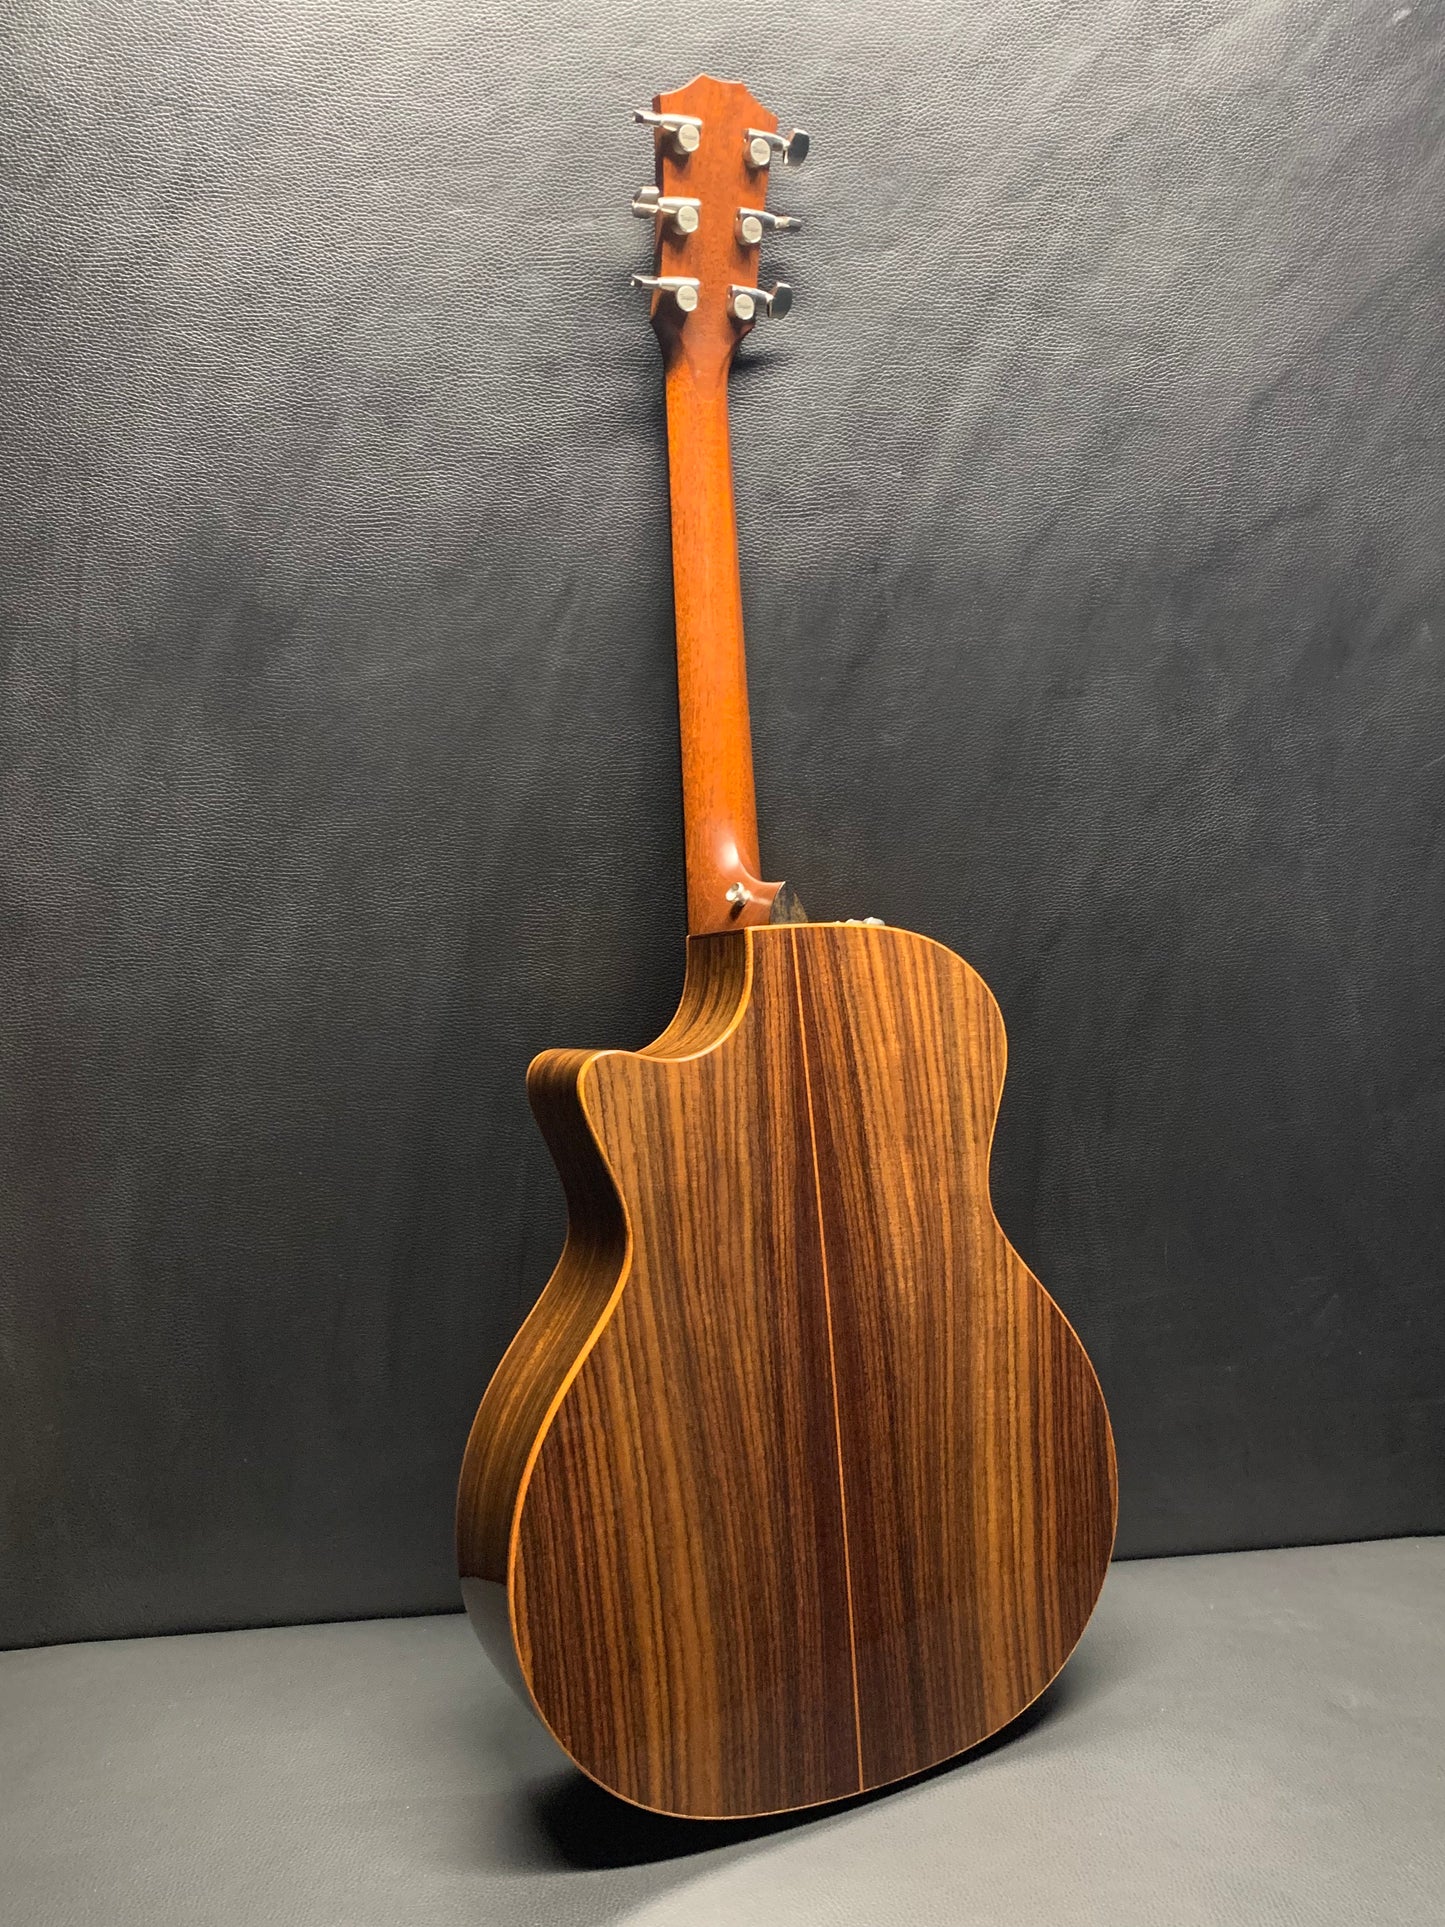 Taylor 714CE 2020 (PRE-OWNED)